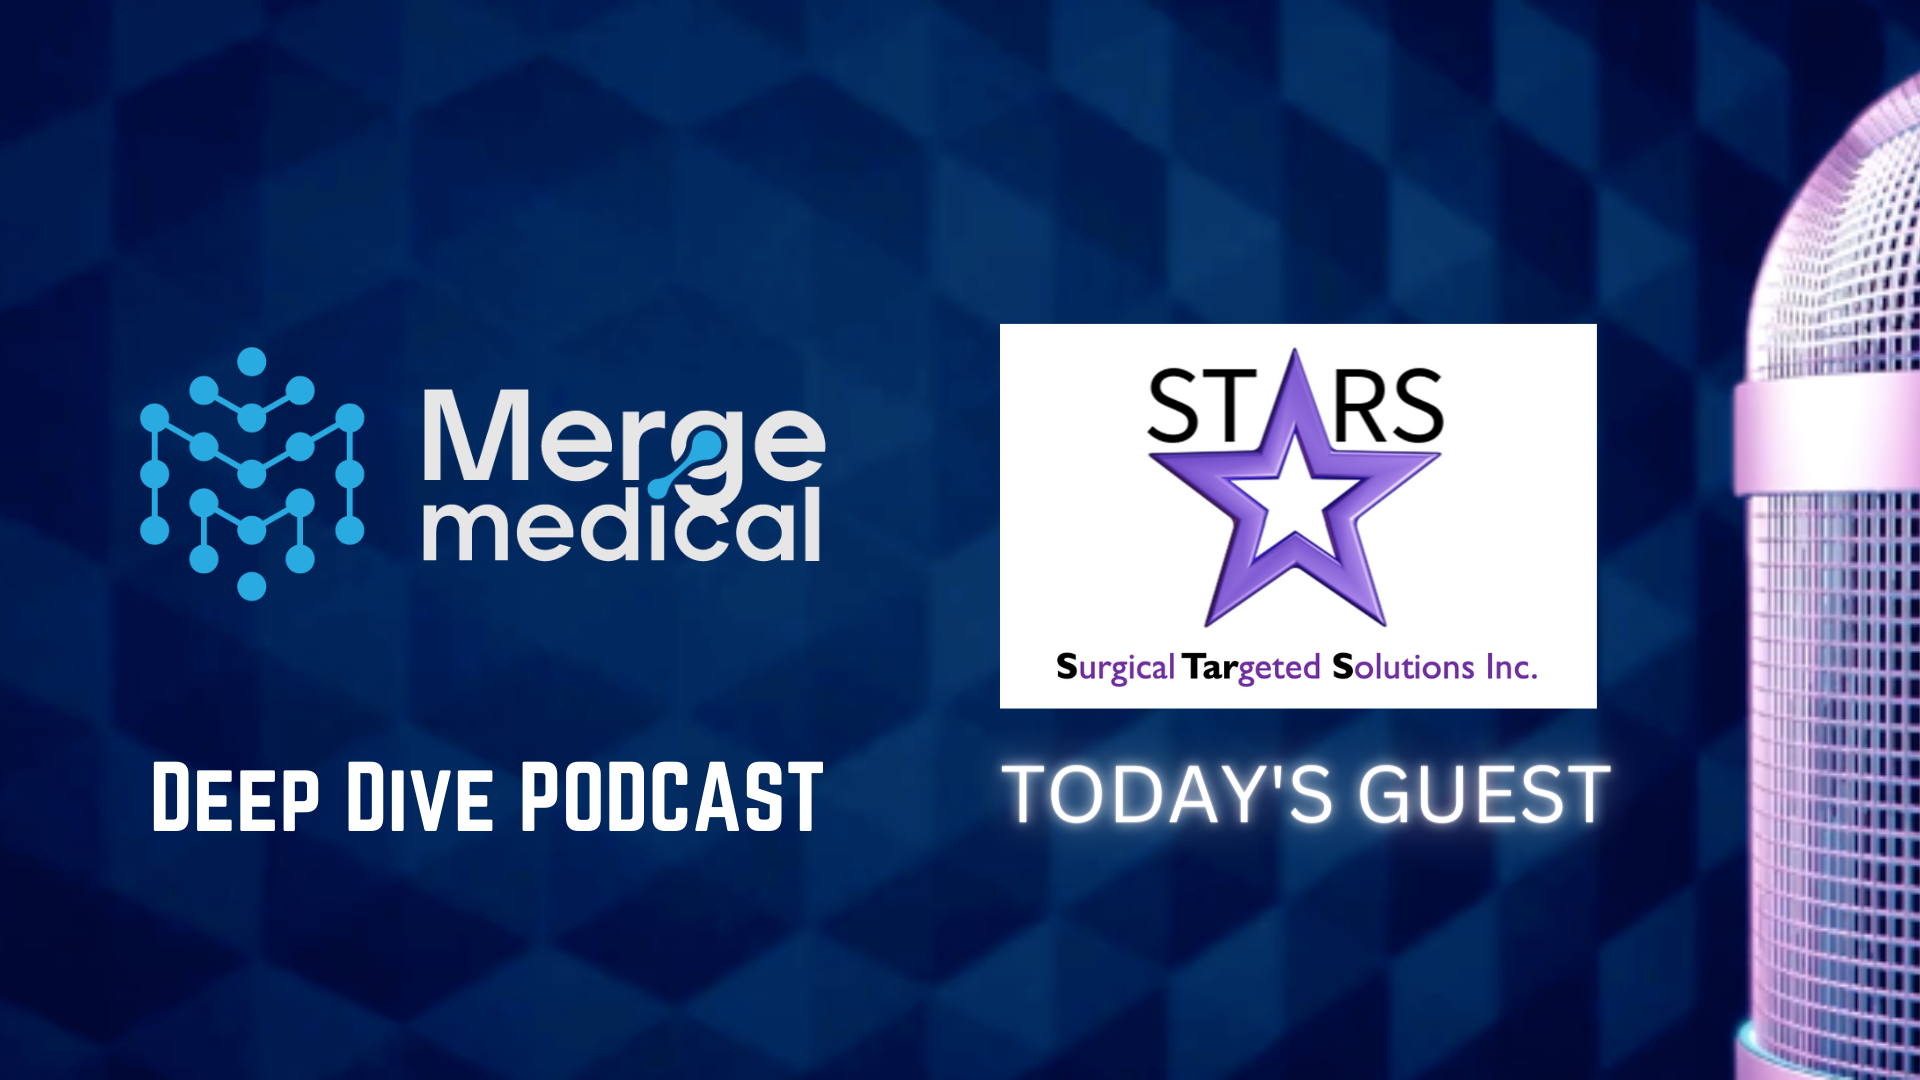 SURGICAL TARGETED SOLUTIONS: Deep Dive Podcast